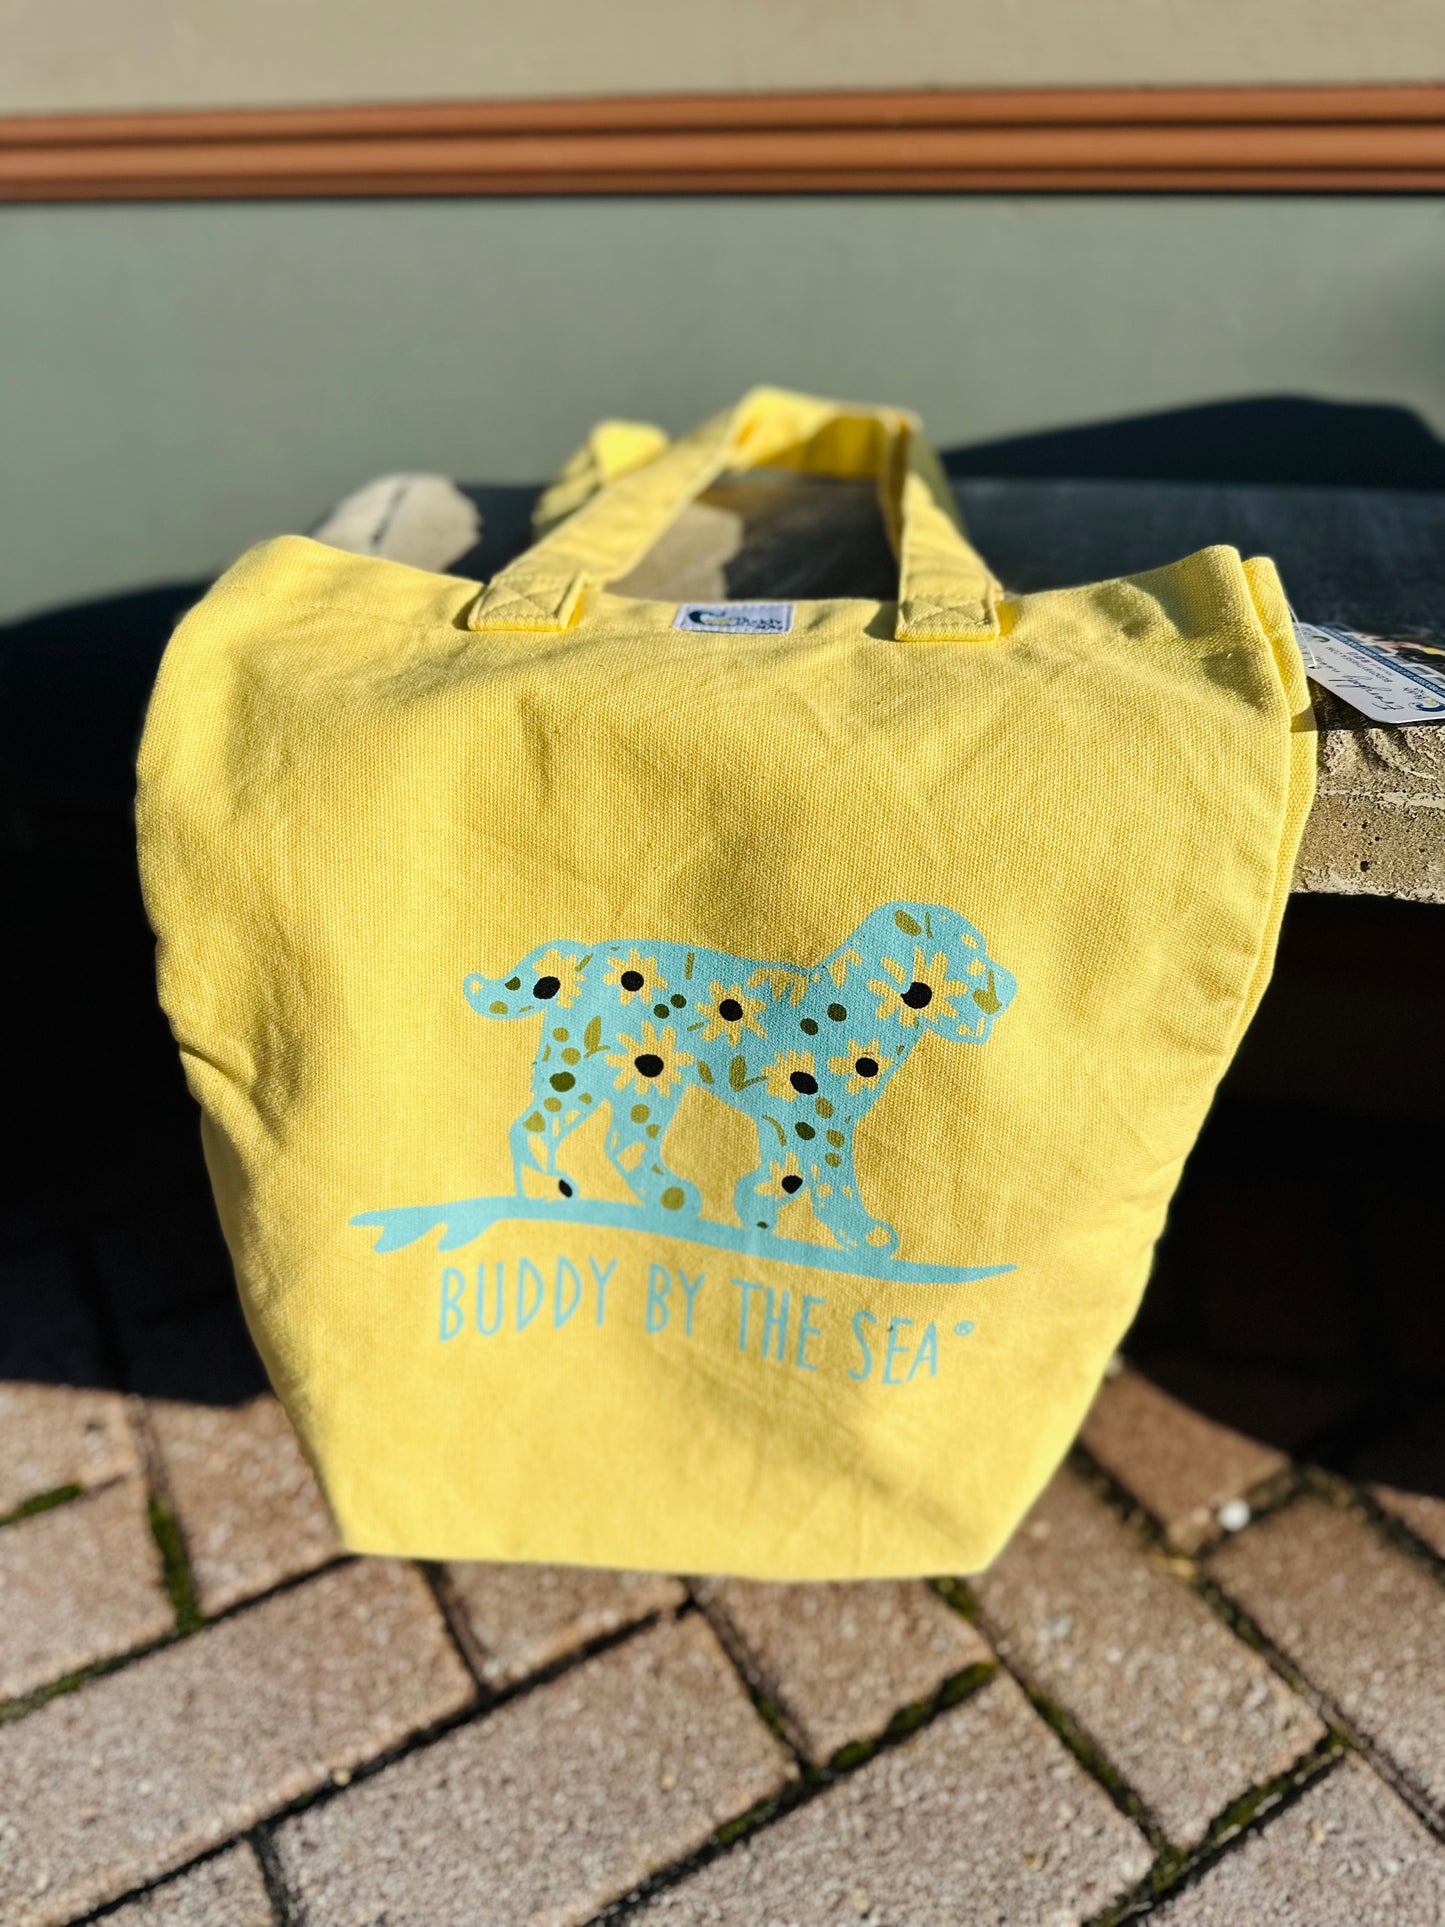 Buddy by the Sea Yellow Sunflower Tote